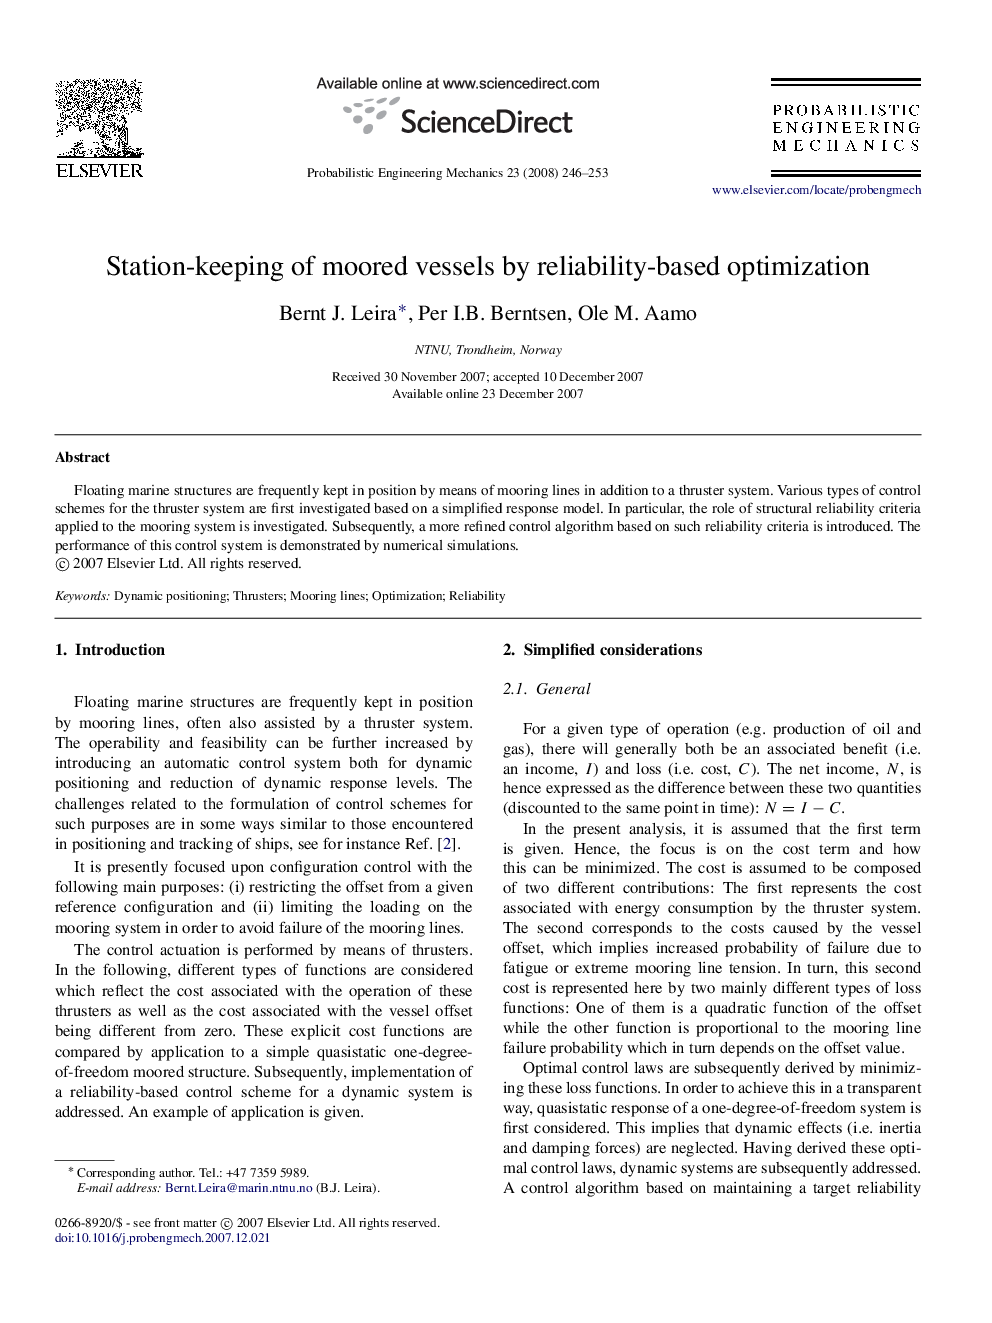 Station-keeping of moored vessels by reliability-based optimization